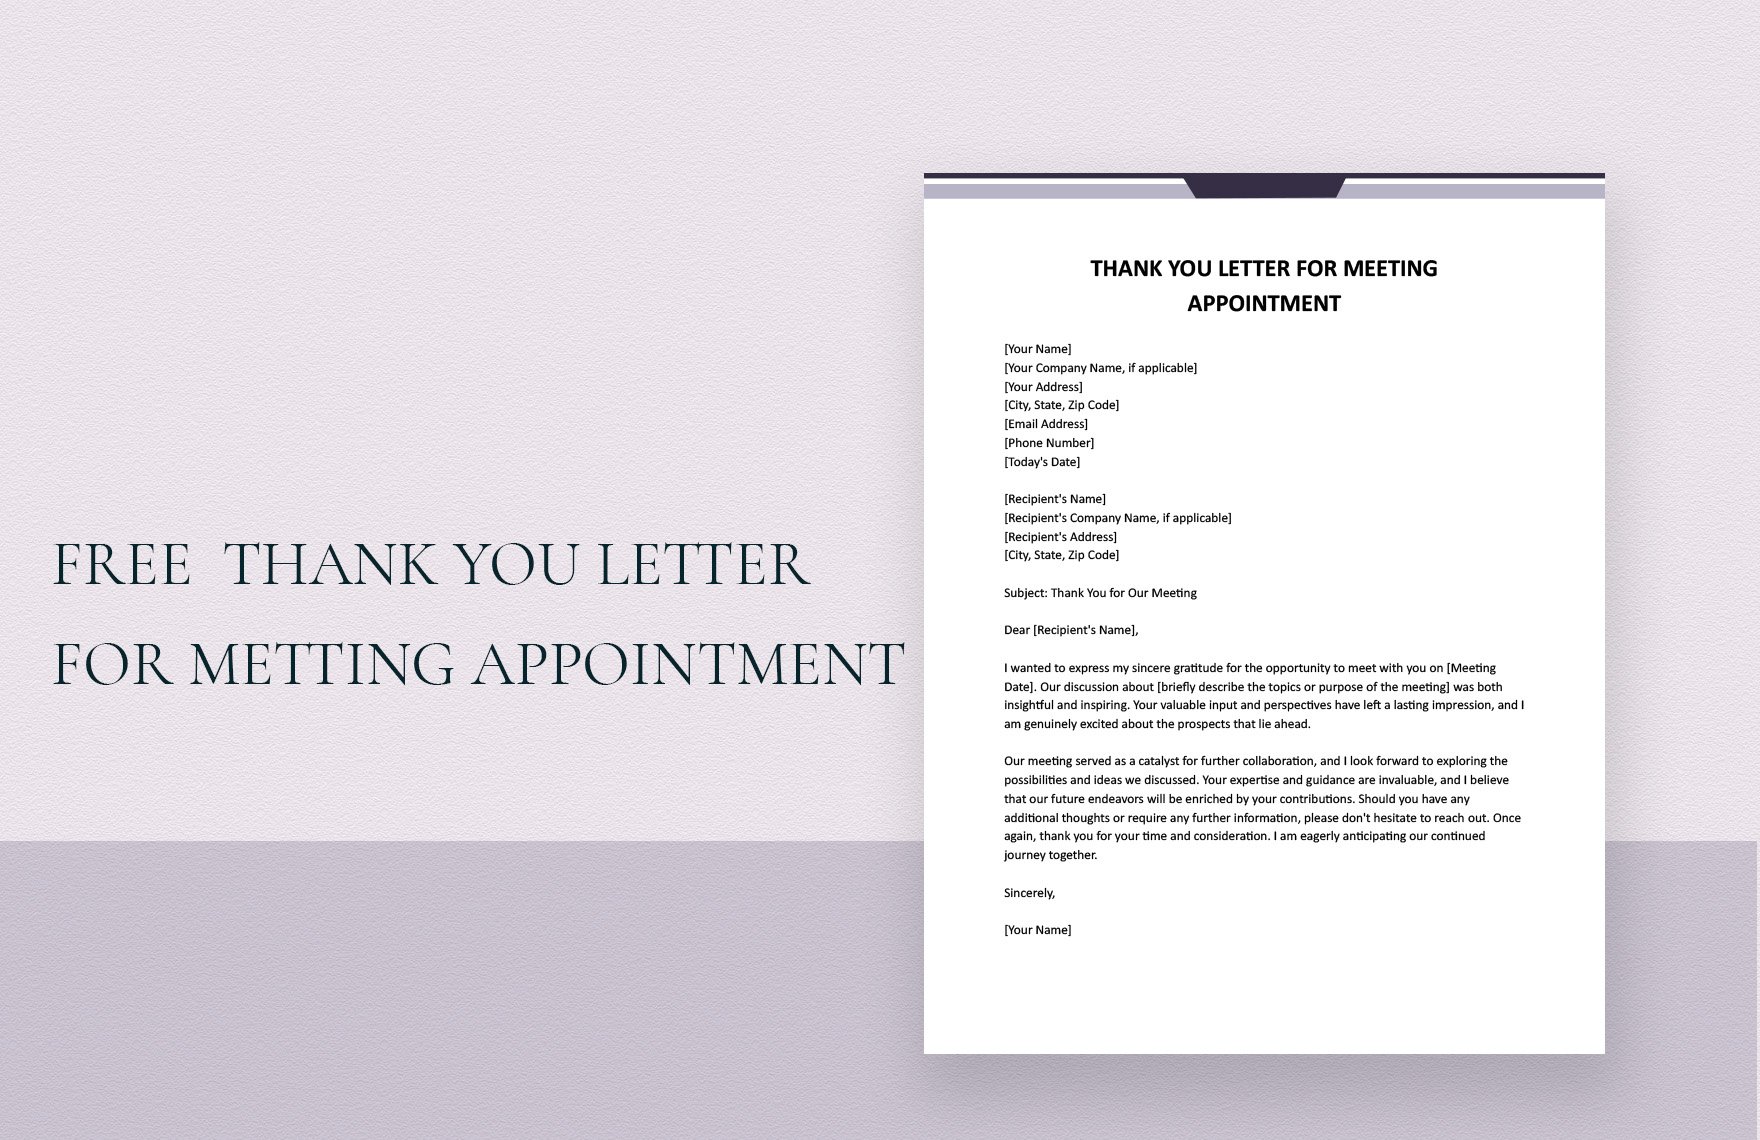 Free Thank You Letter For Meeting Appointment